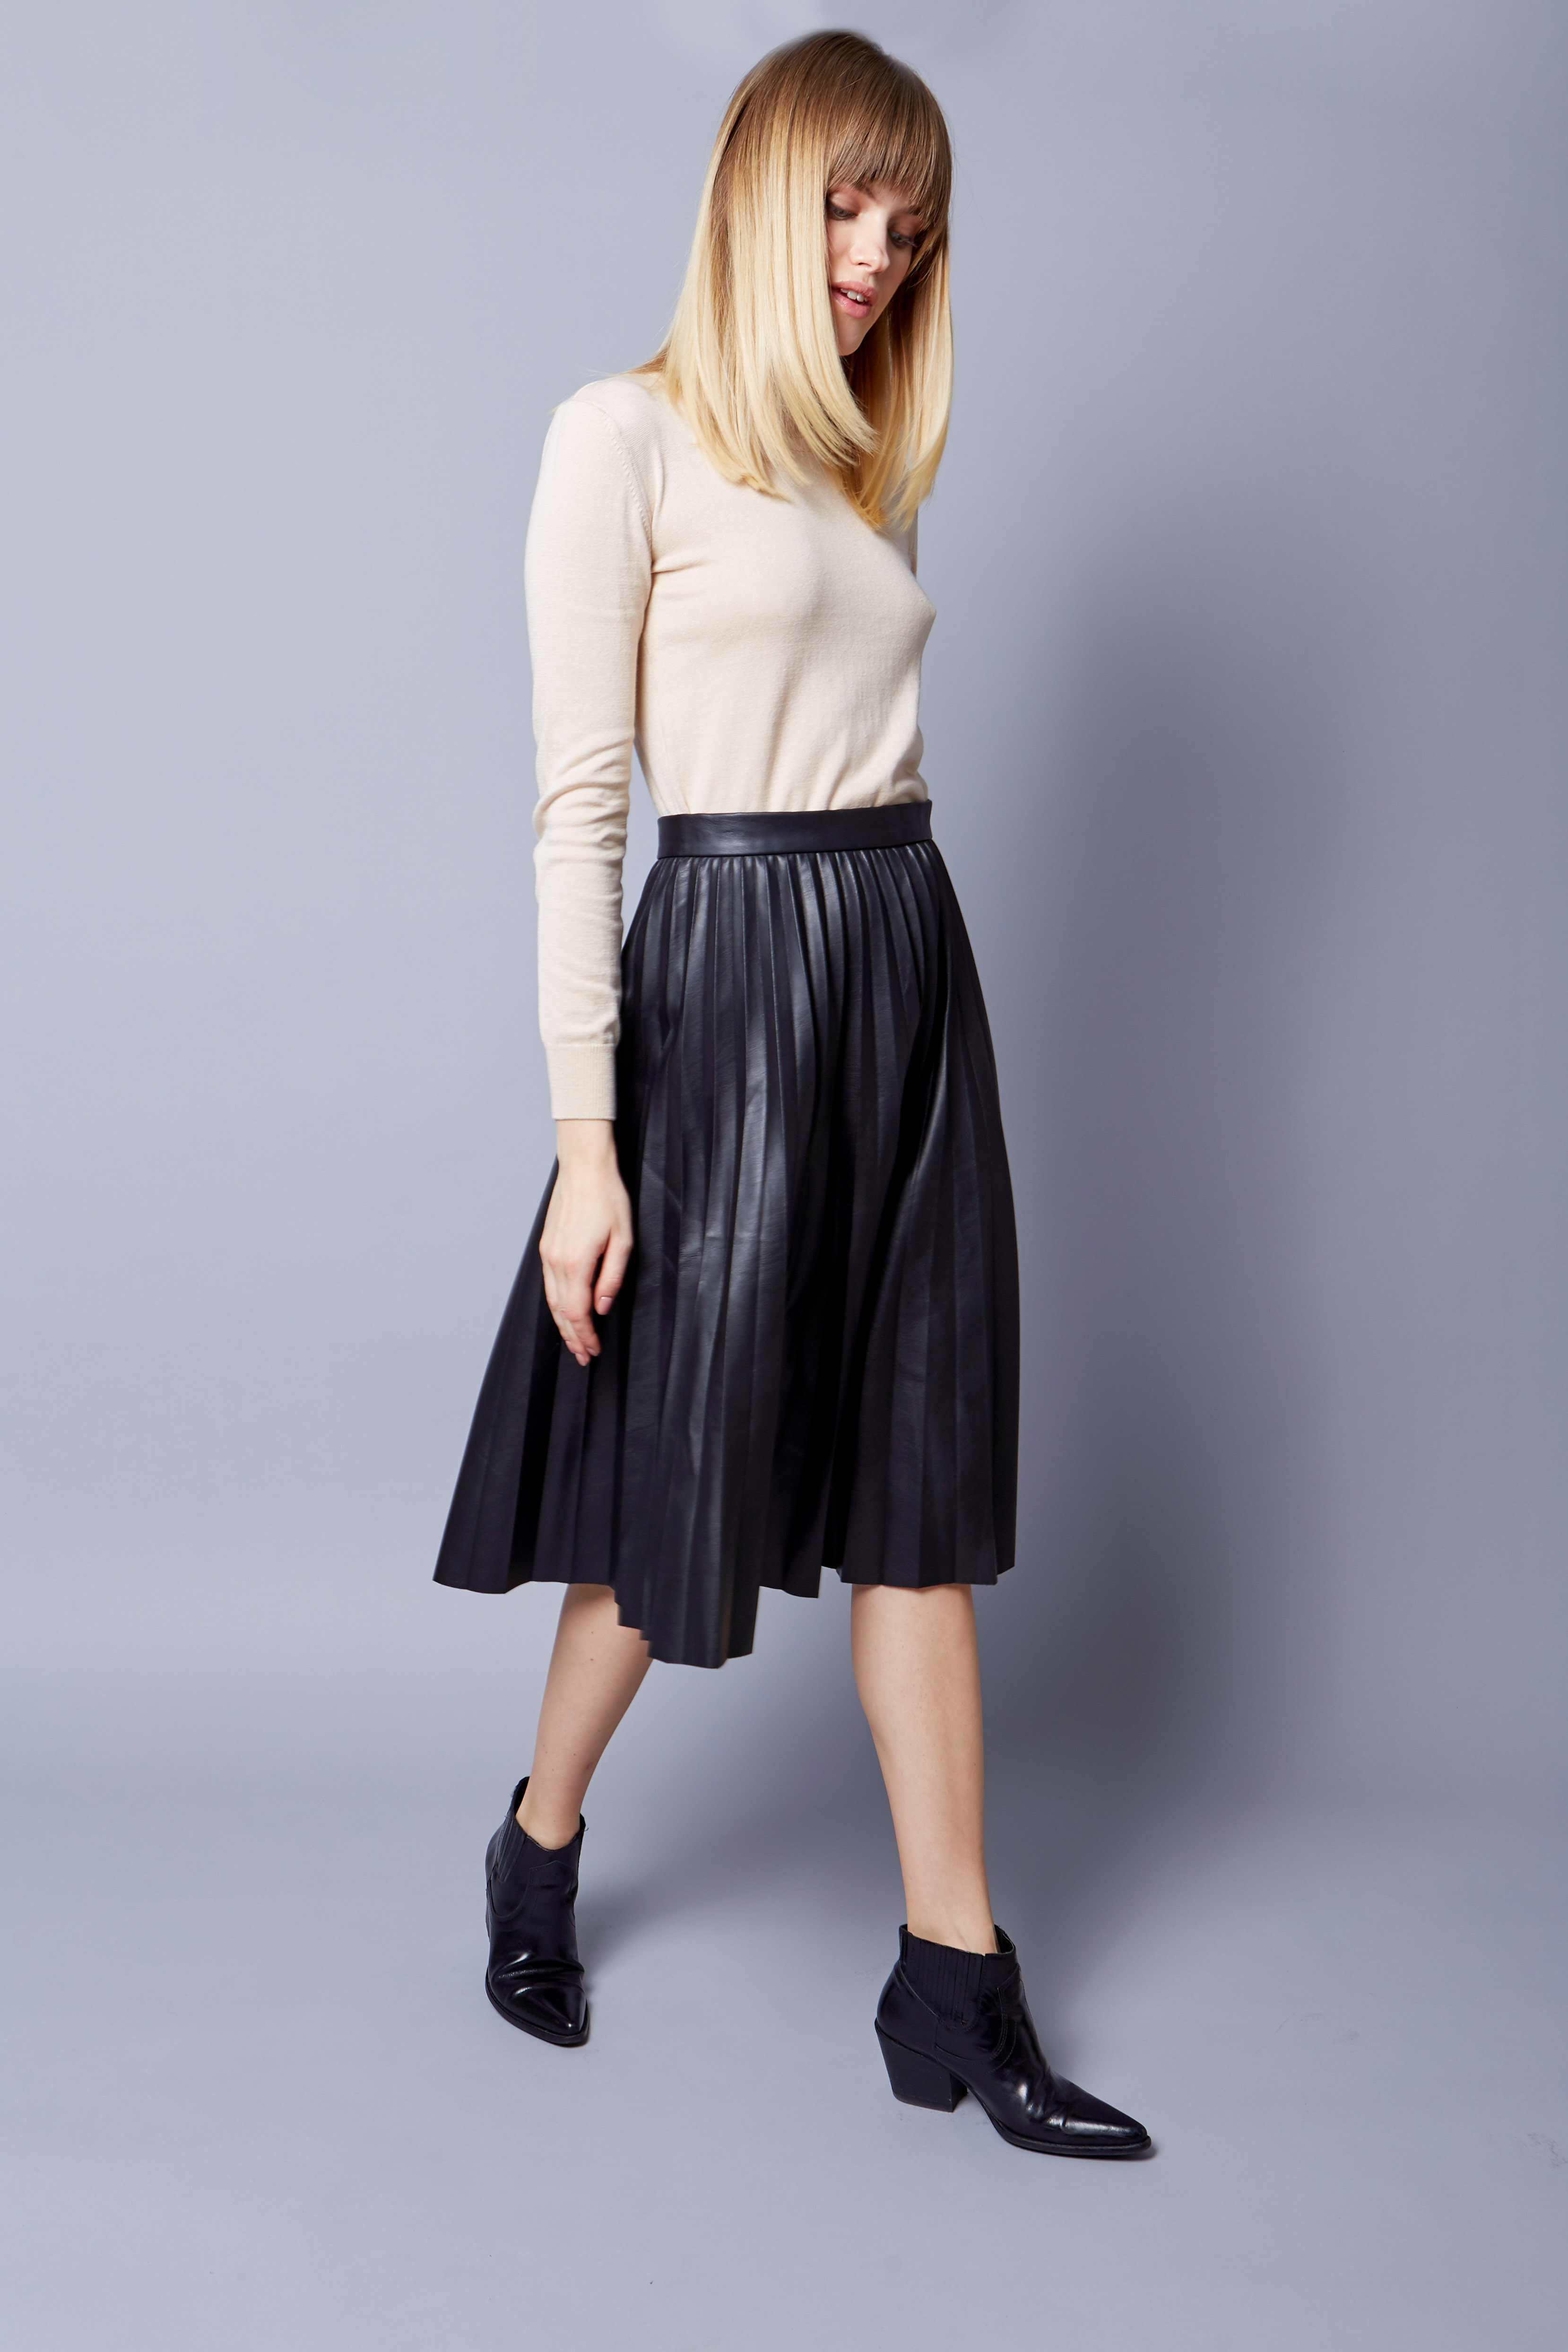 Below the knee pleated black eco-leather skirt, photo 2